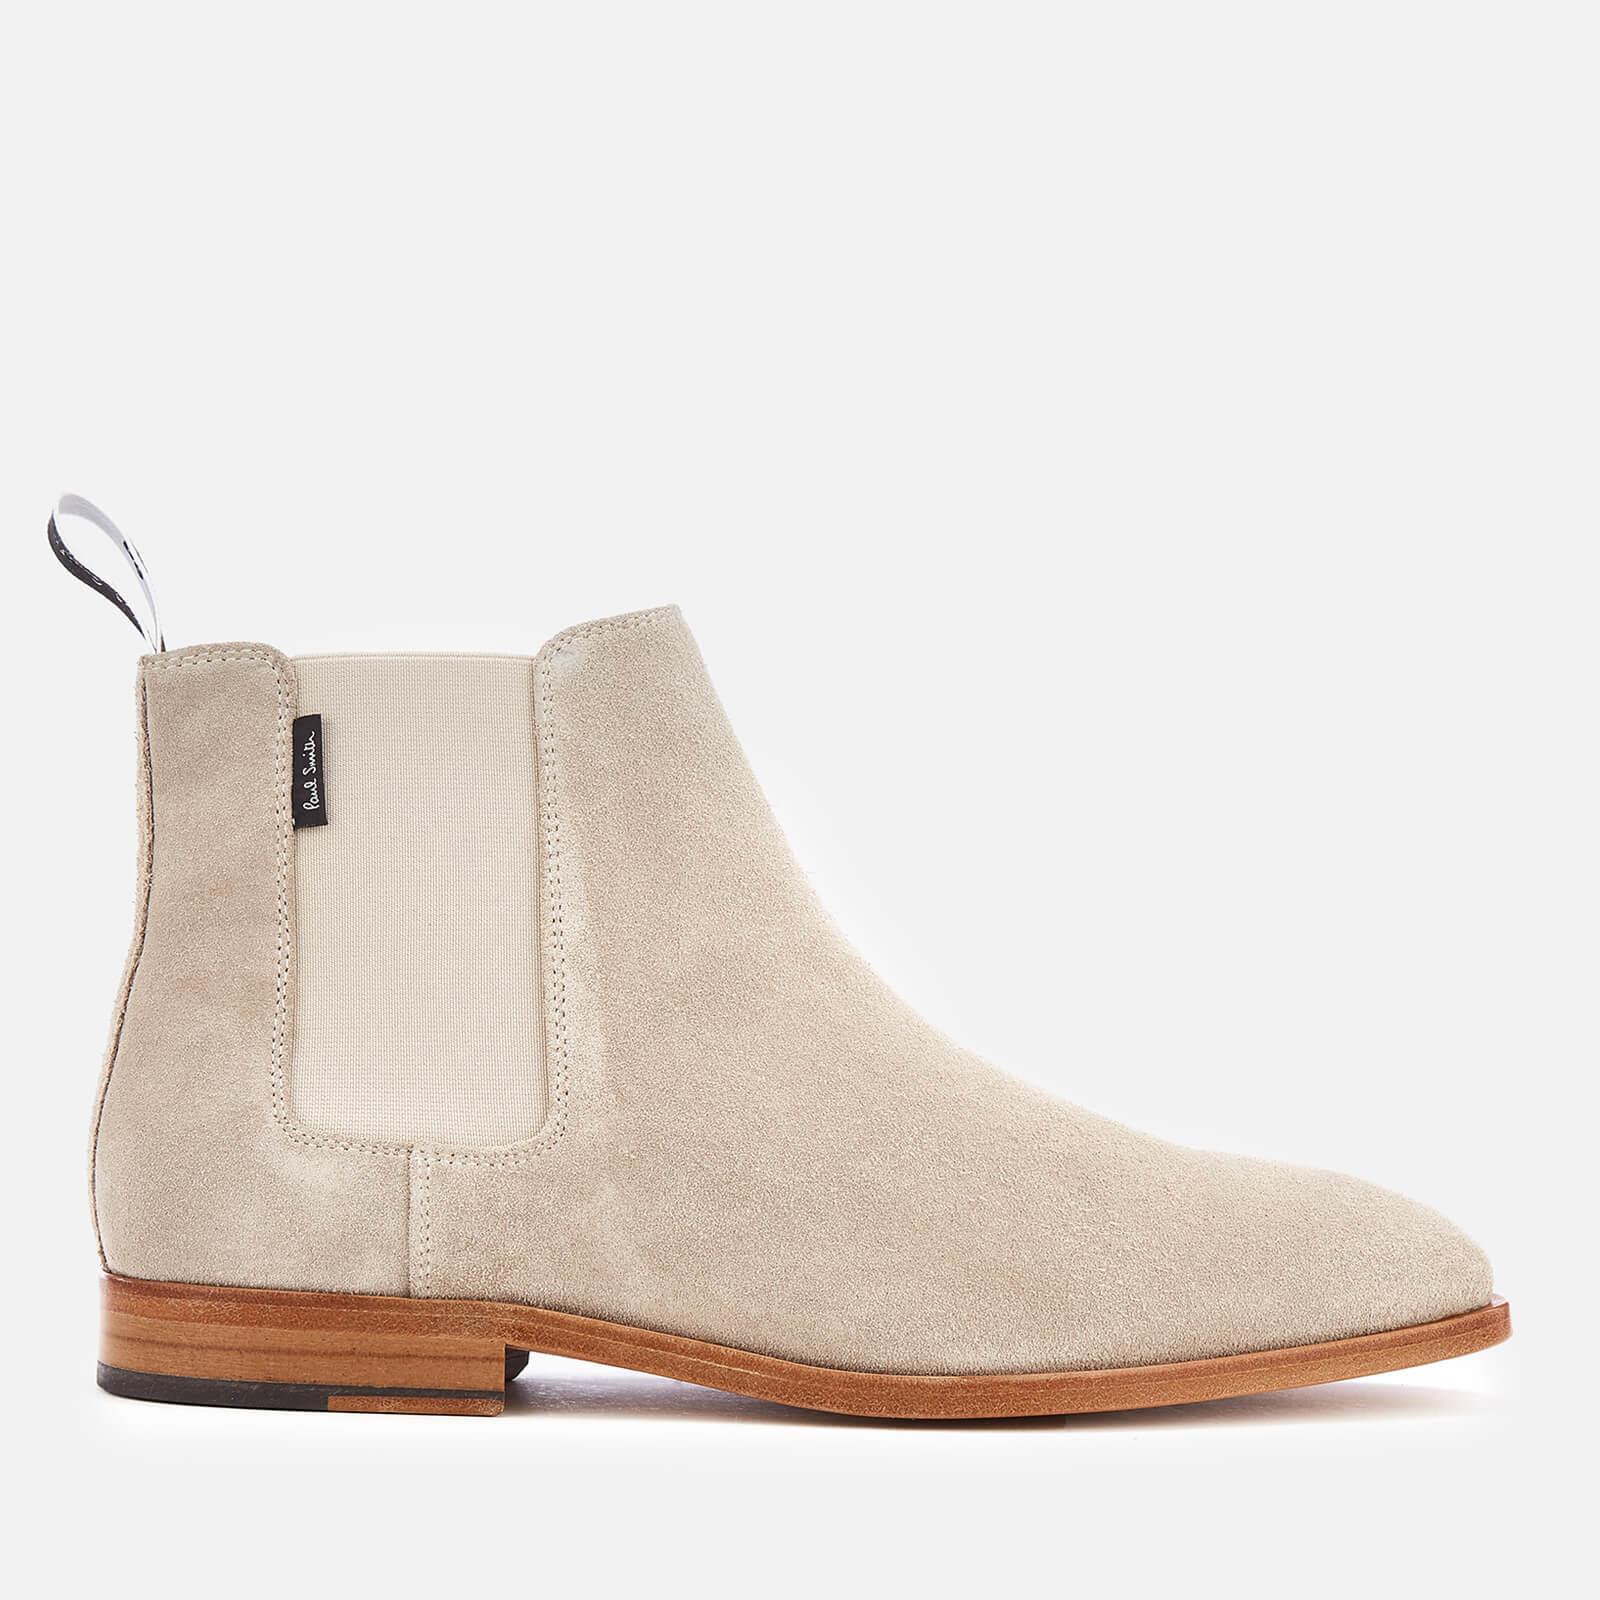 PS by Paul Smith Gerald Suede Chelsea Boots in Grey (Gray) for Men - Lyst